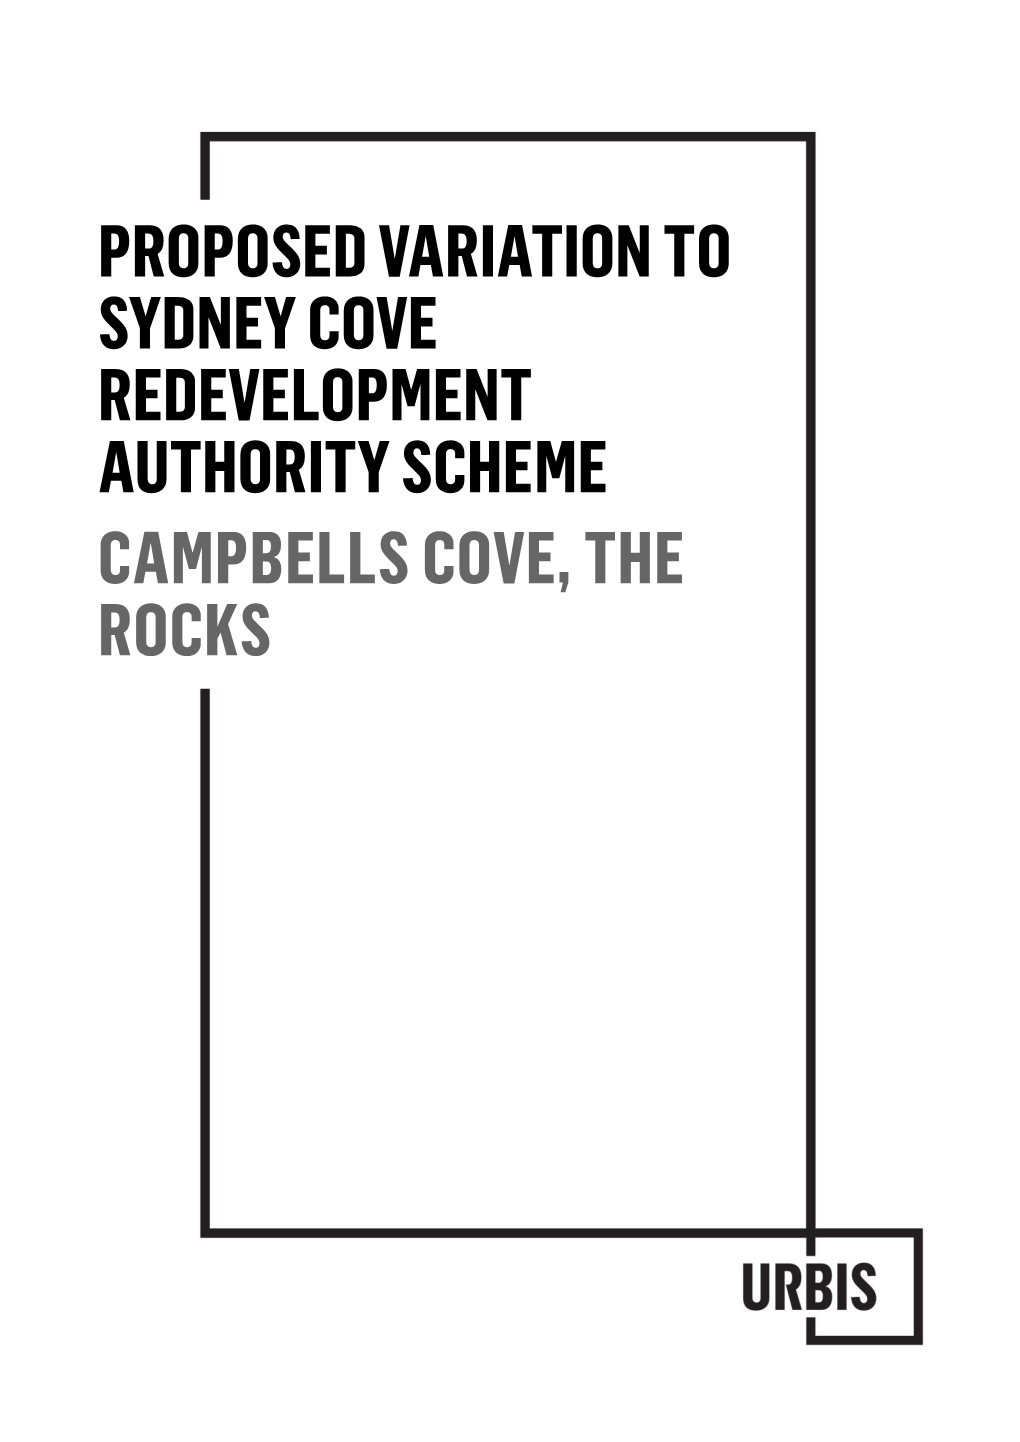 Proposed Variation to Sydney Cove Redevelopment Authority Scheme Campbells Cove, the Rocks